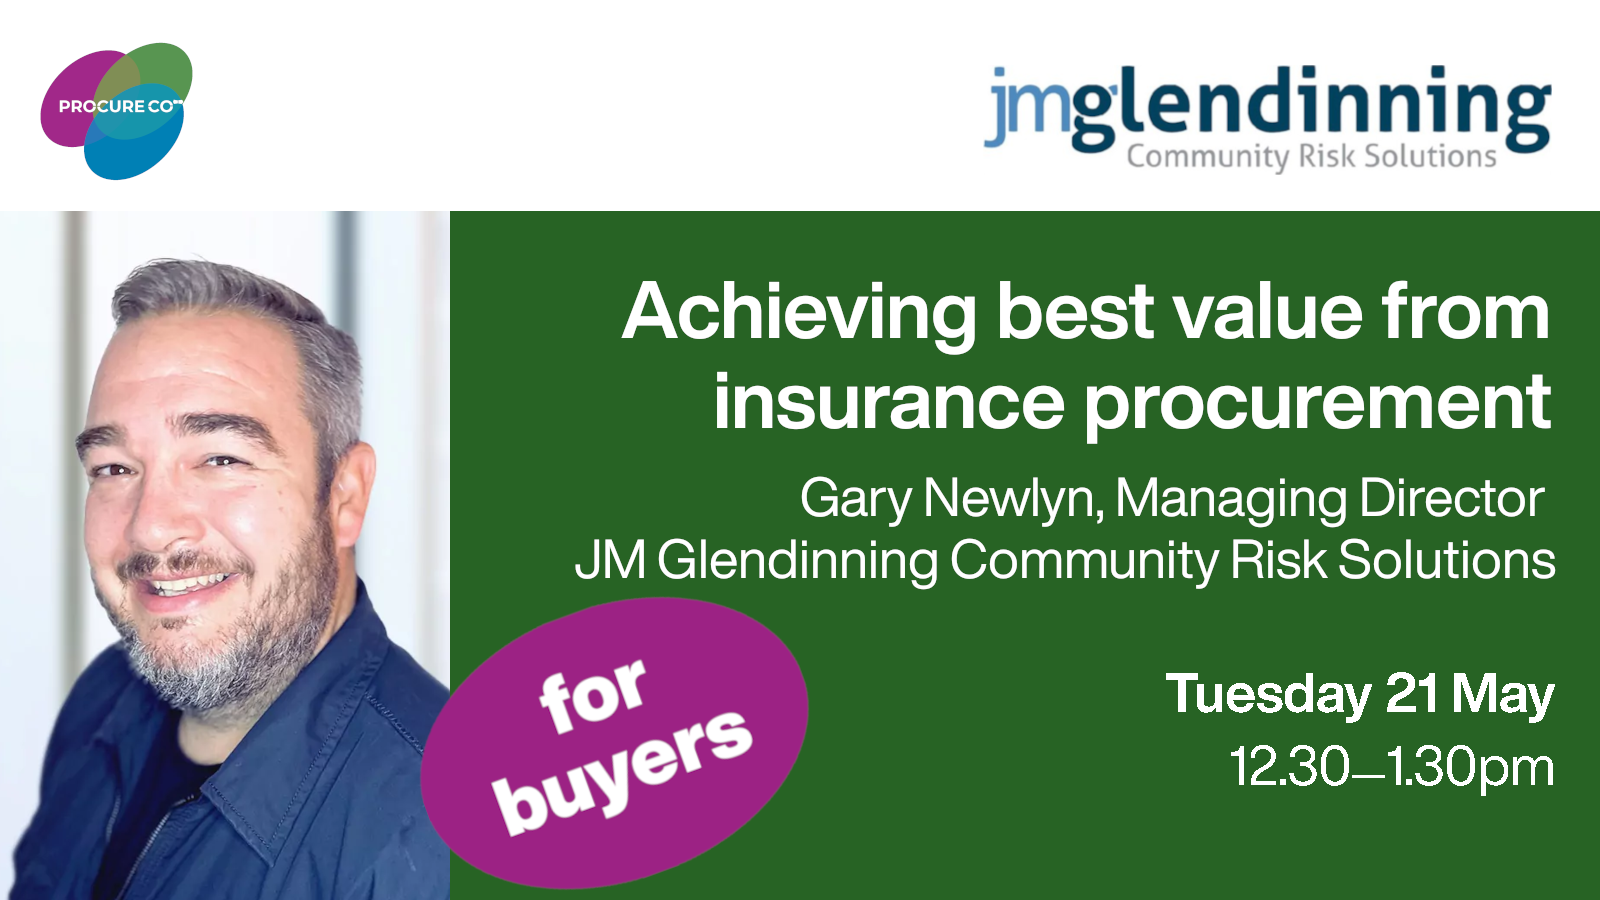 Gary Newlyn on 'Achieving best value from insurance procurement'